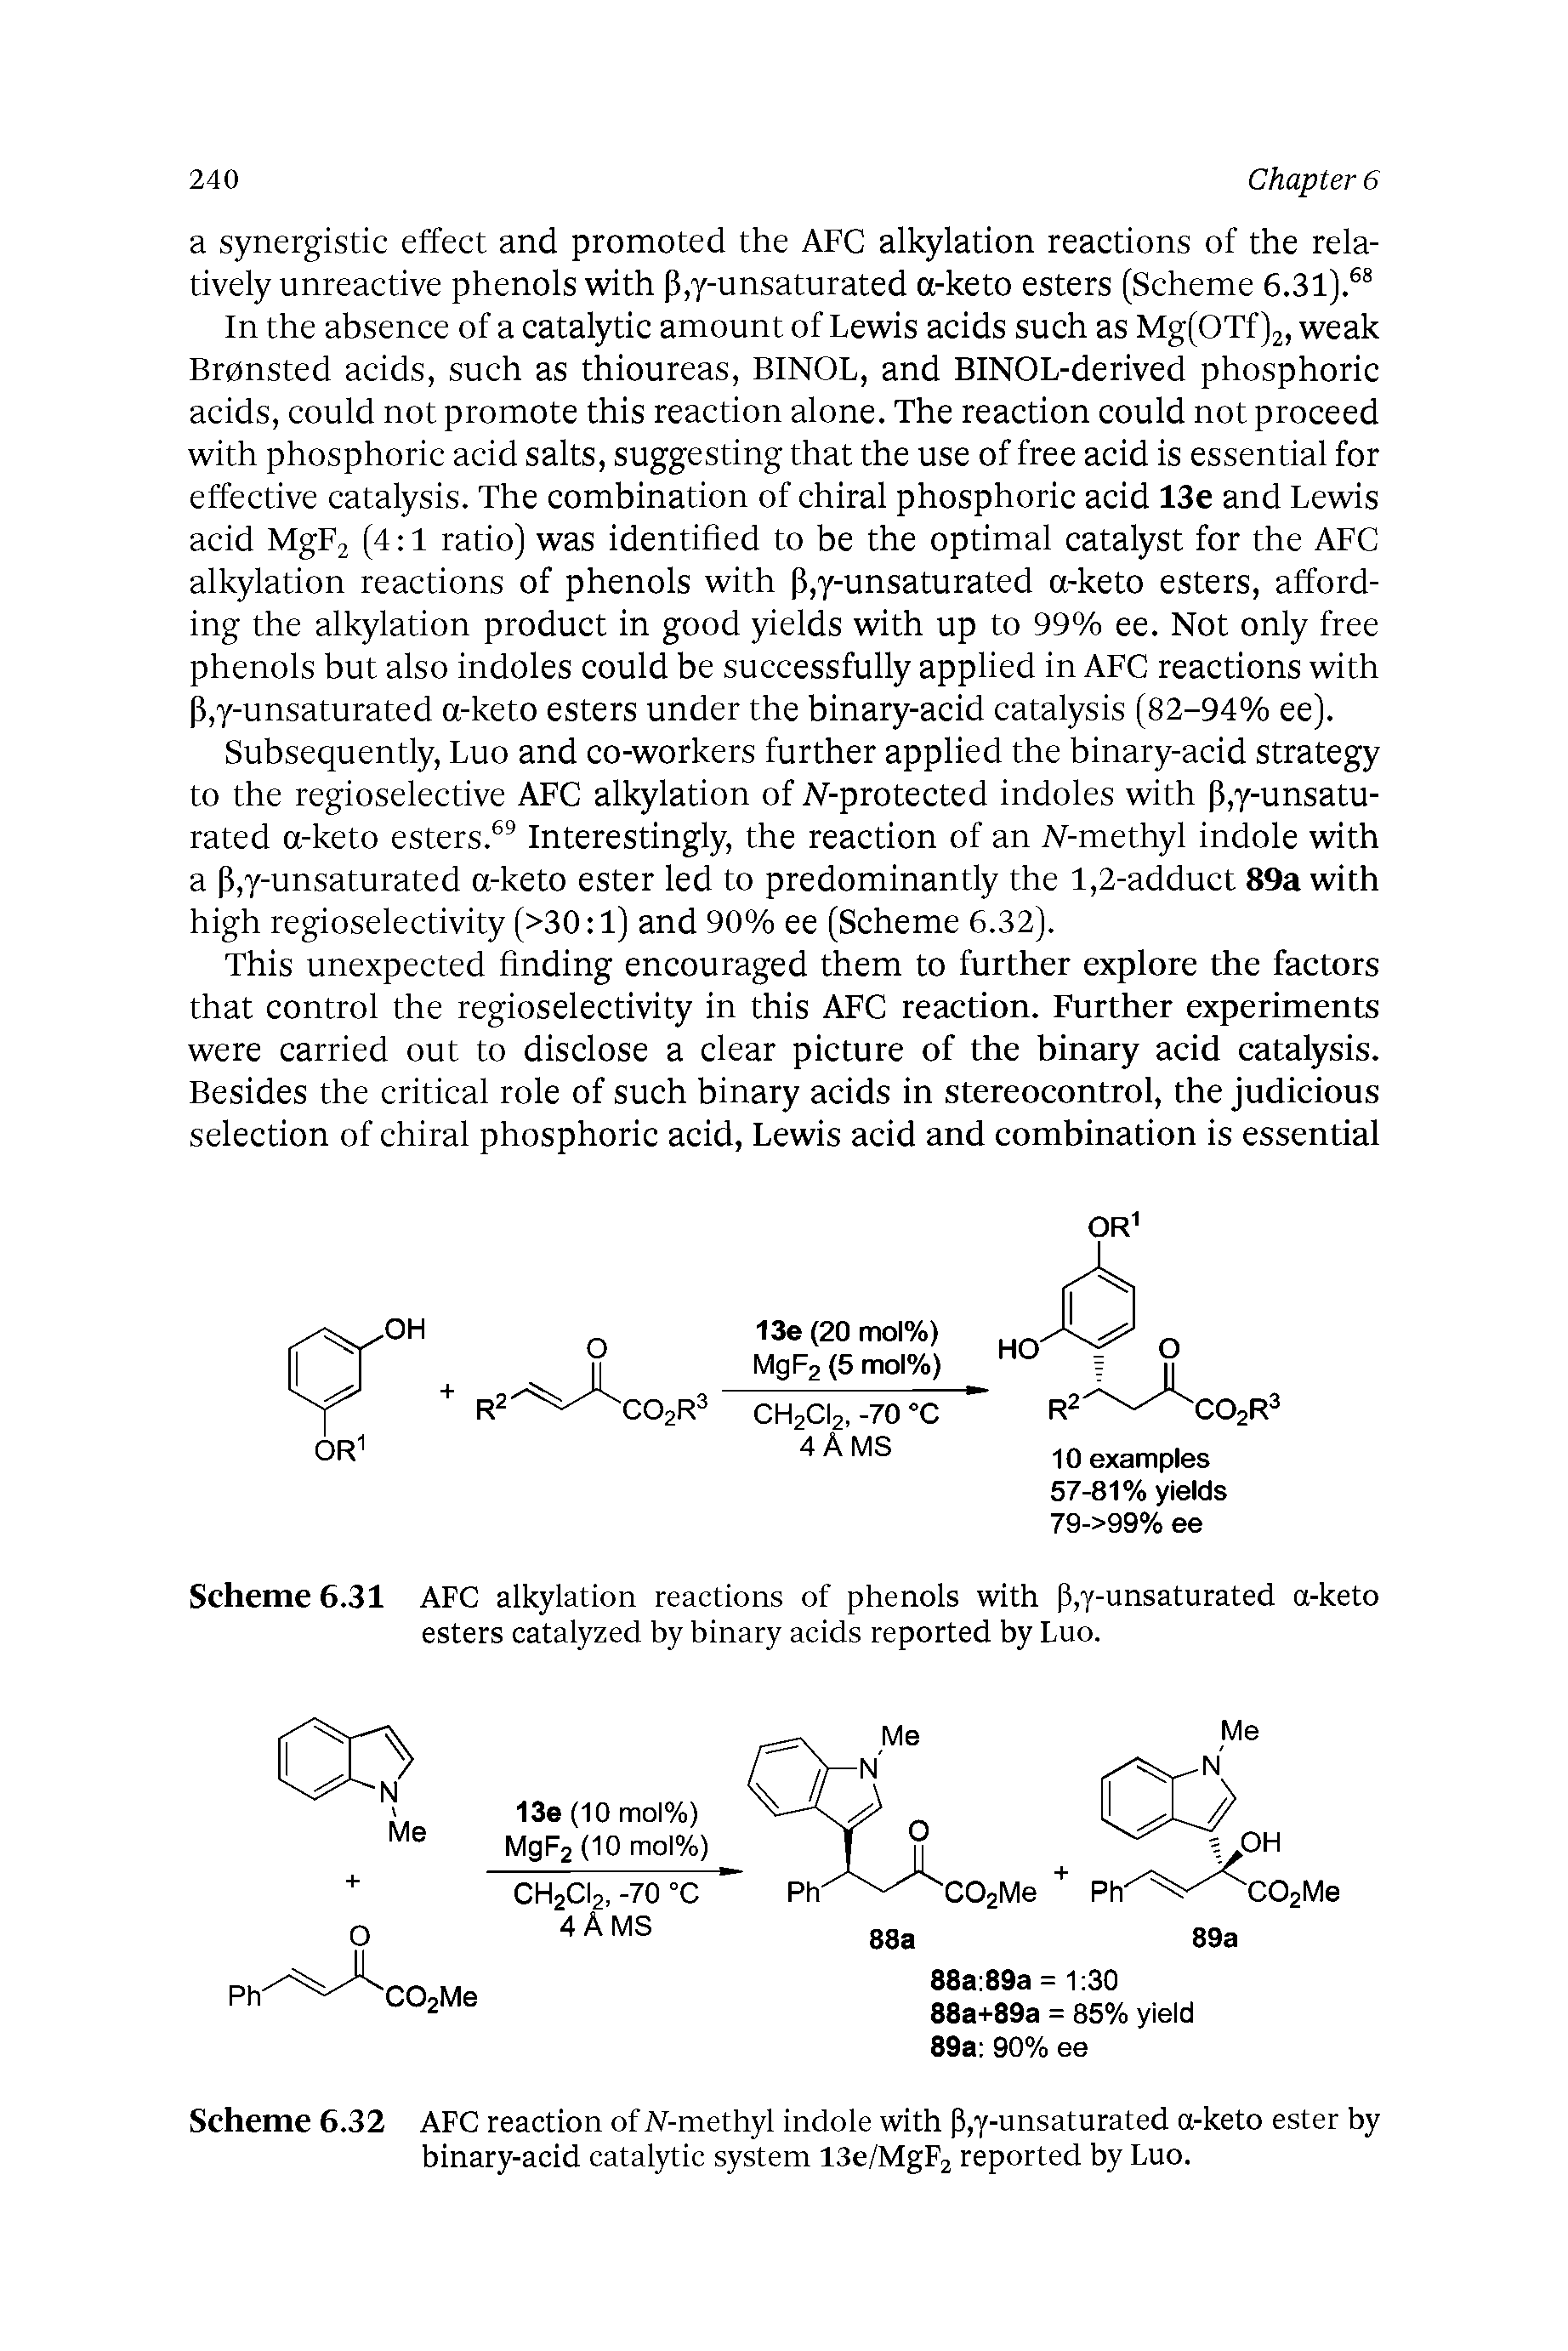 Scheme 6.31 AFC alkylation reactions of phenols with p,y-unsaturated a-keto esters catalyzed by binary acids reported by Luo.